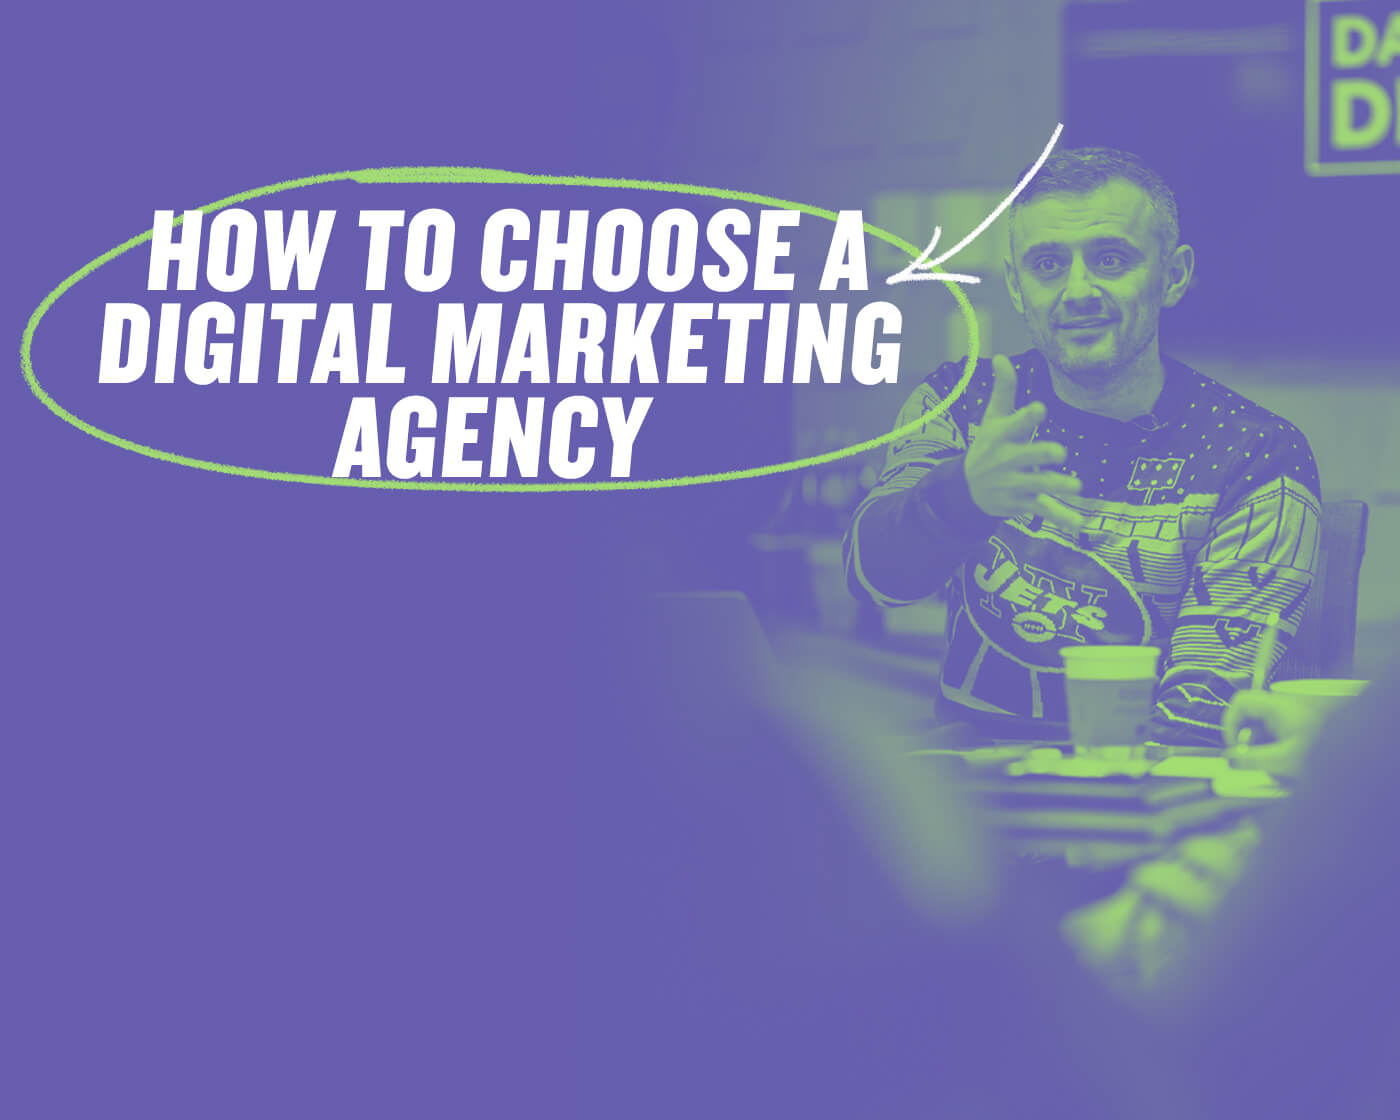 Choosing a Digital Marketing Agency for Small Businesses